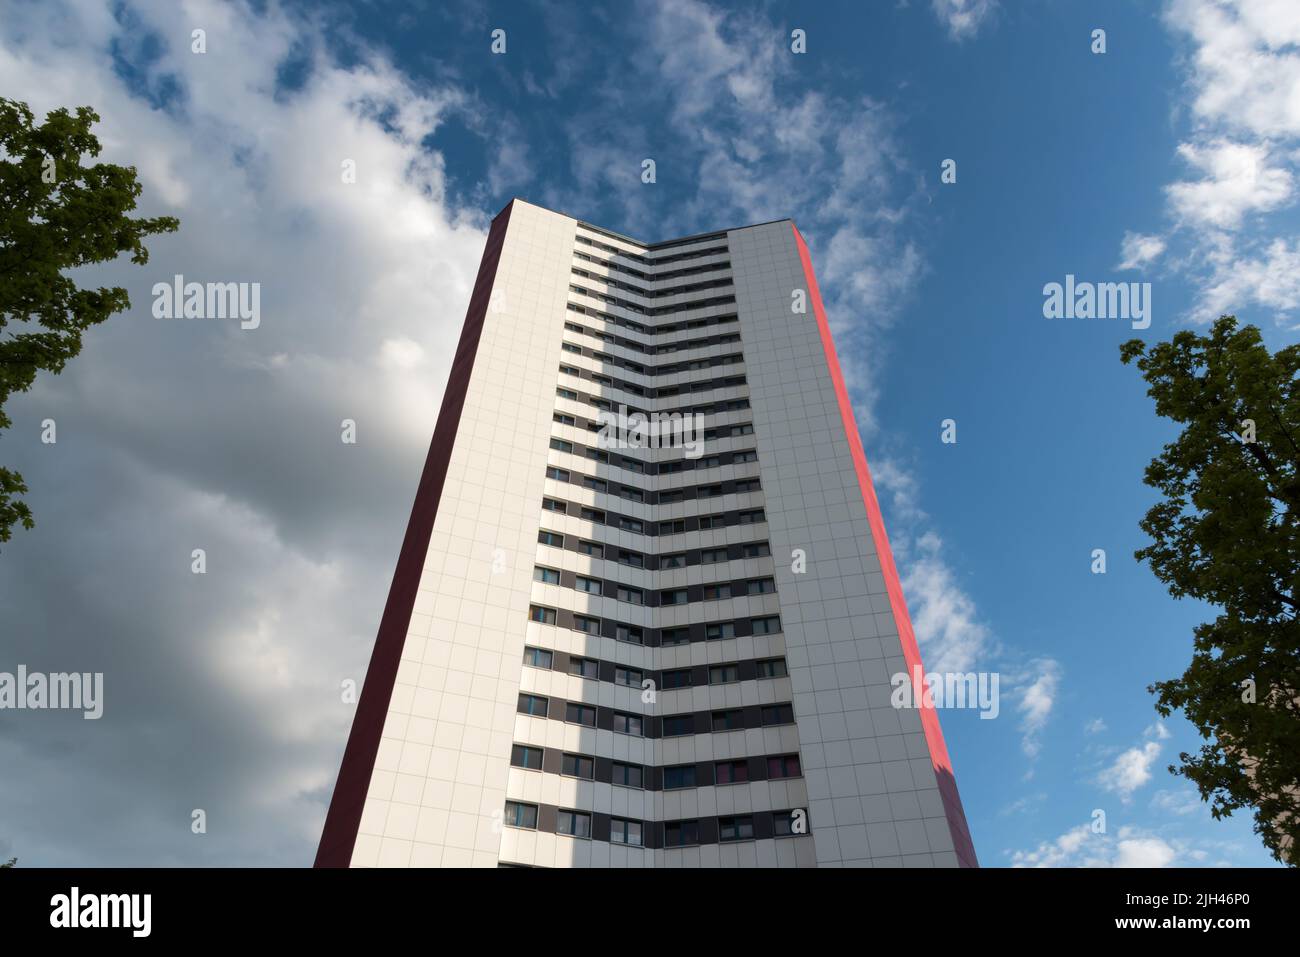 A red and gray skyscraper in the capital Berlin Stock Photo